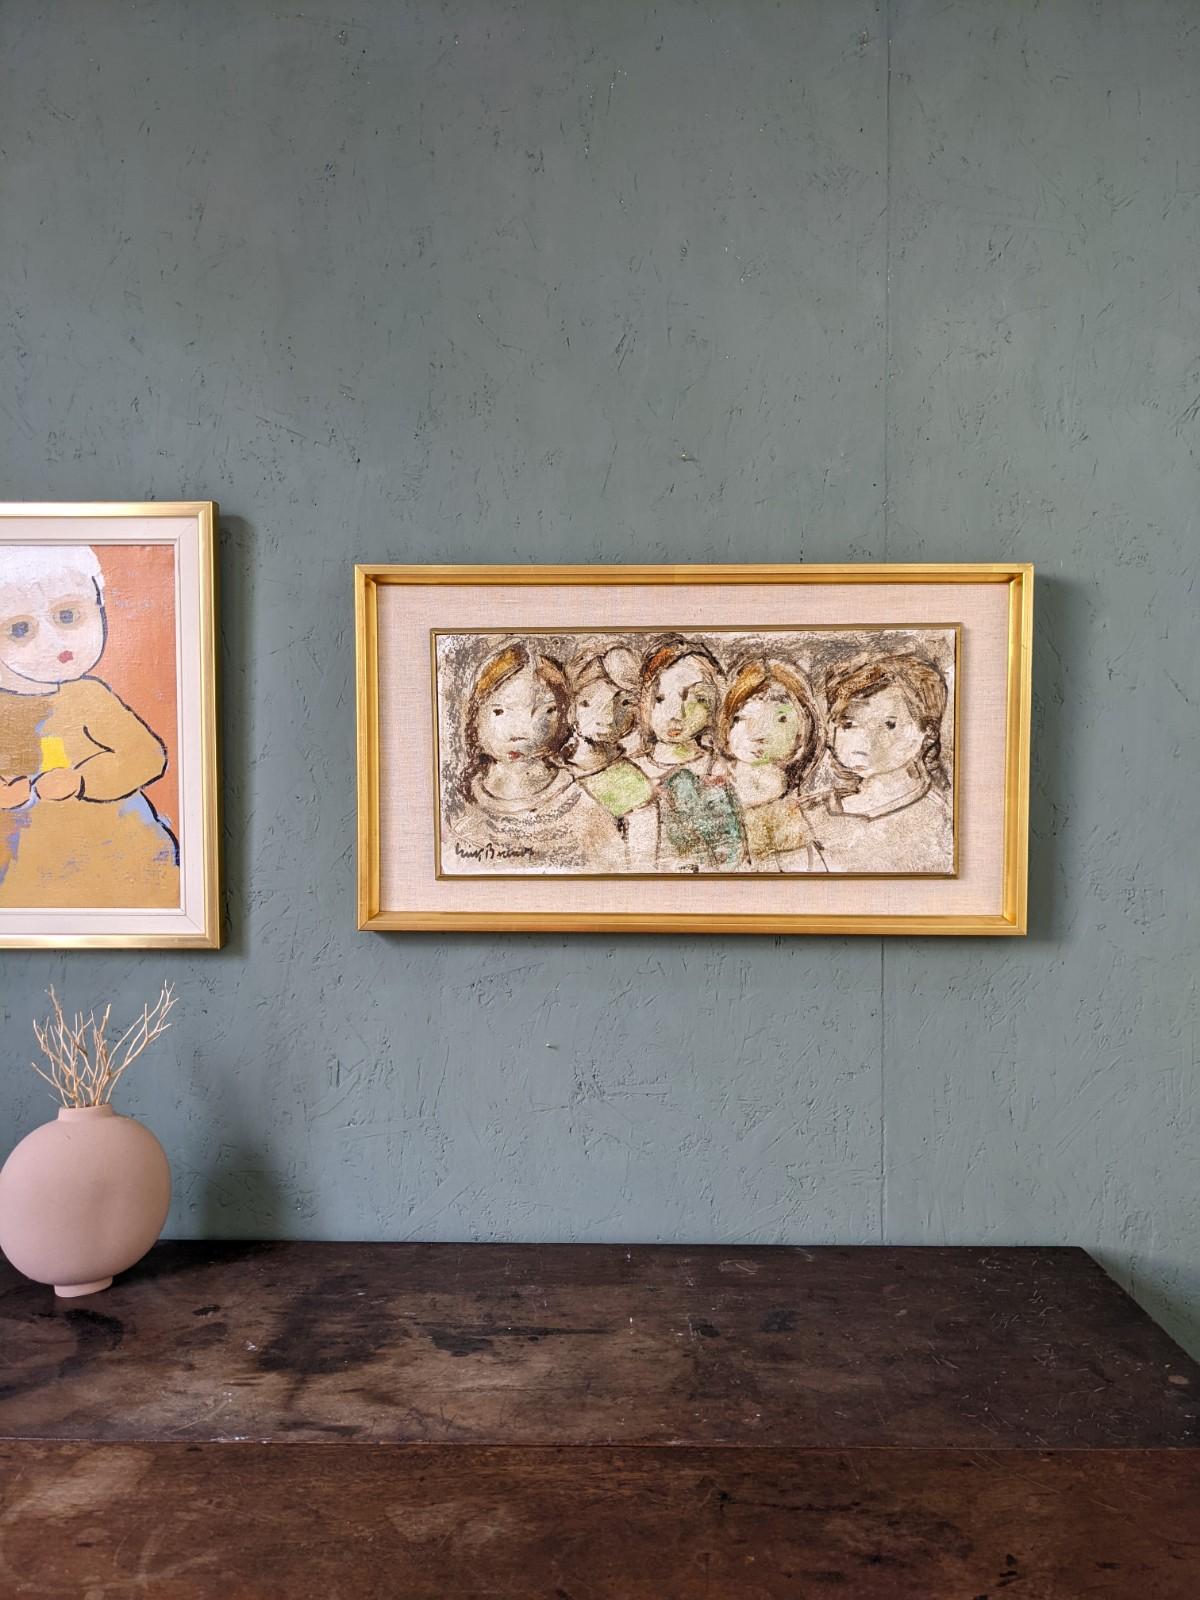 THE CHILDREN
Size: 36.5 x 66 cm (including frame)
Oil on board

A richly textured and endearing mid century modernist style figurative portrait, painted in oil onto board.

Rendered in an expressionist manner, the artwork depicts 5 young figures,